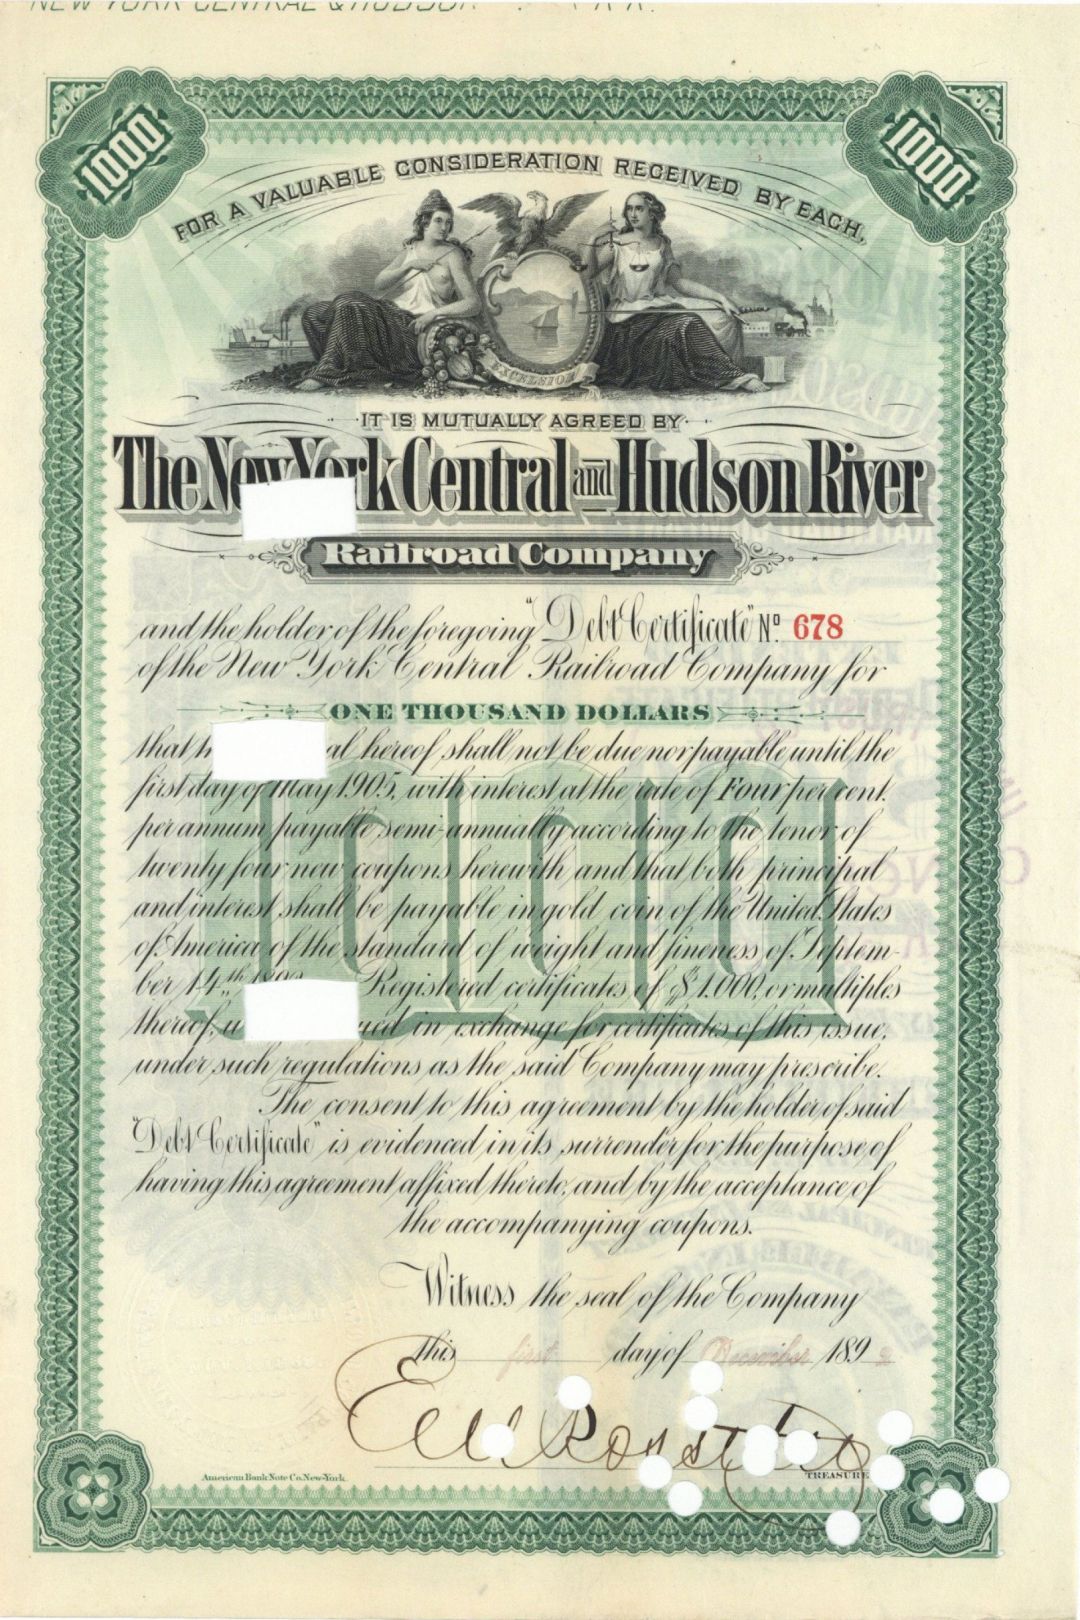 New York Central and Hudson River Railroad Co. Signed by E.V.W. Rossiter - $1,000 or $500 Bond